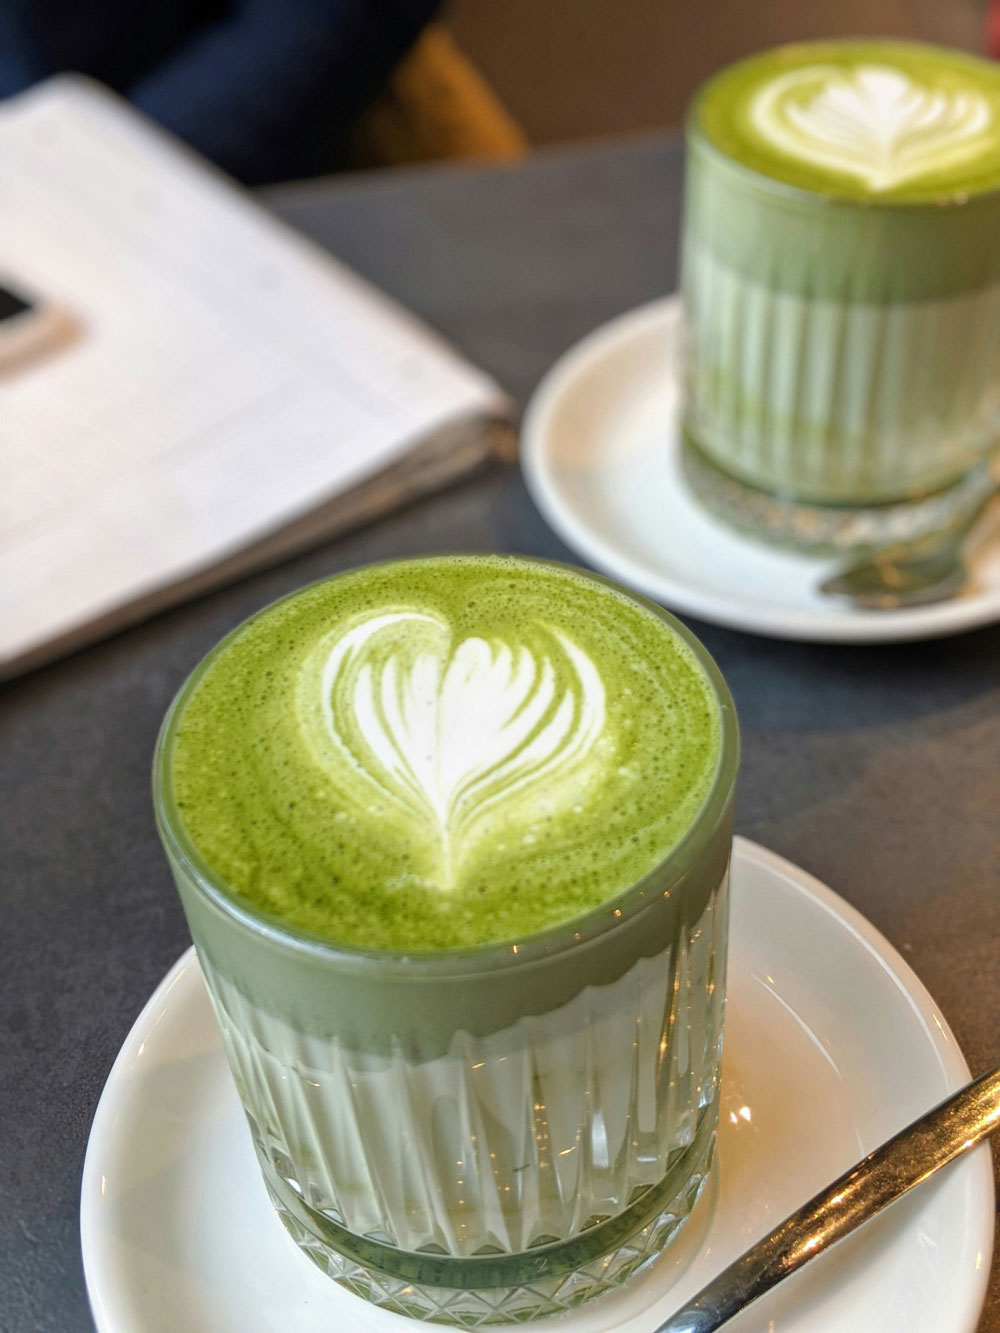 Why Is Everyone Drinking Matcha Right Now?